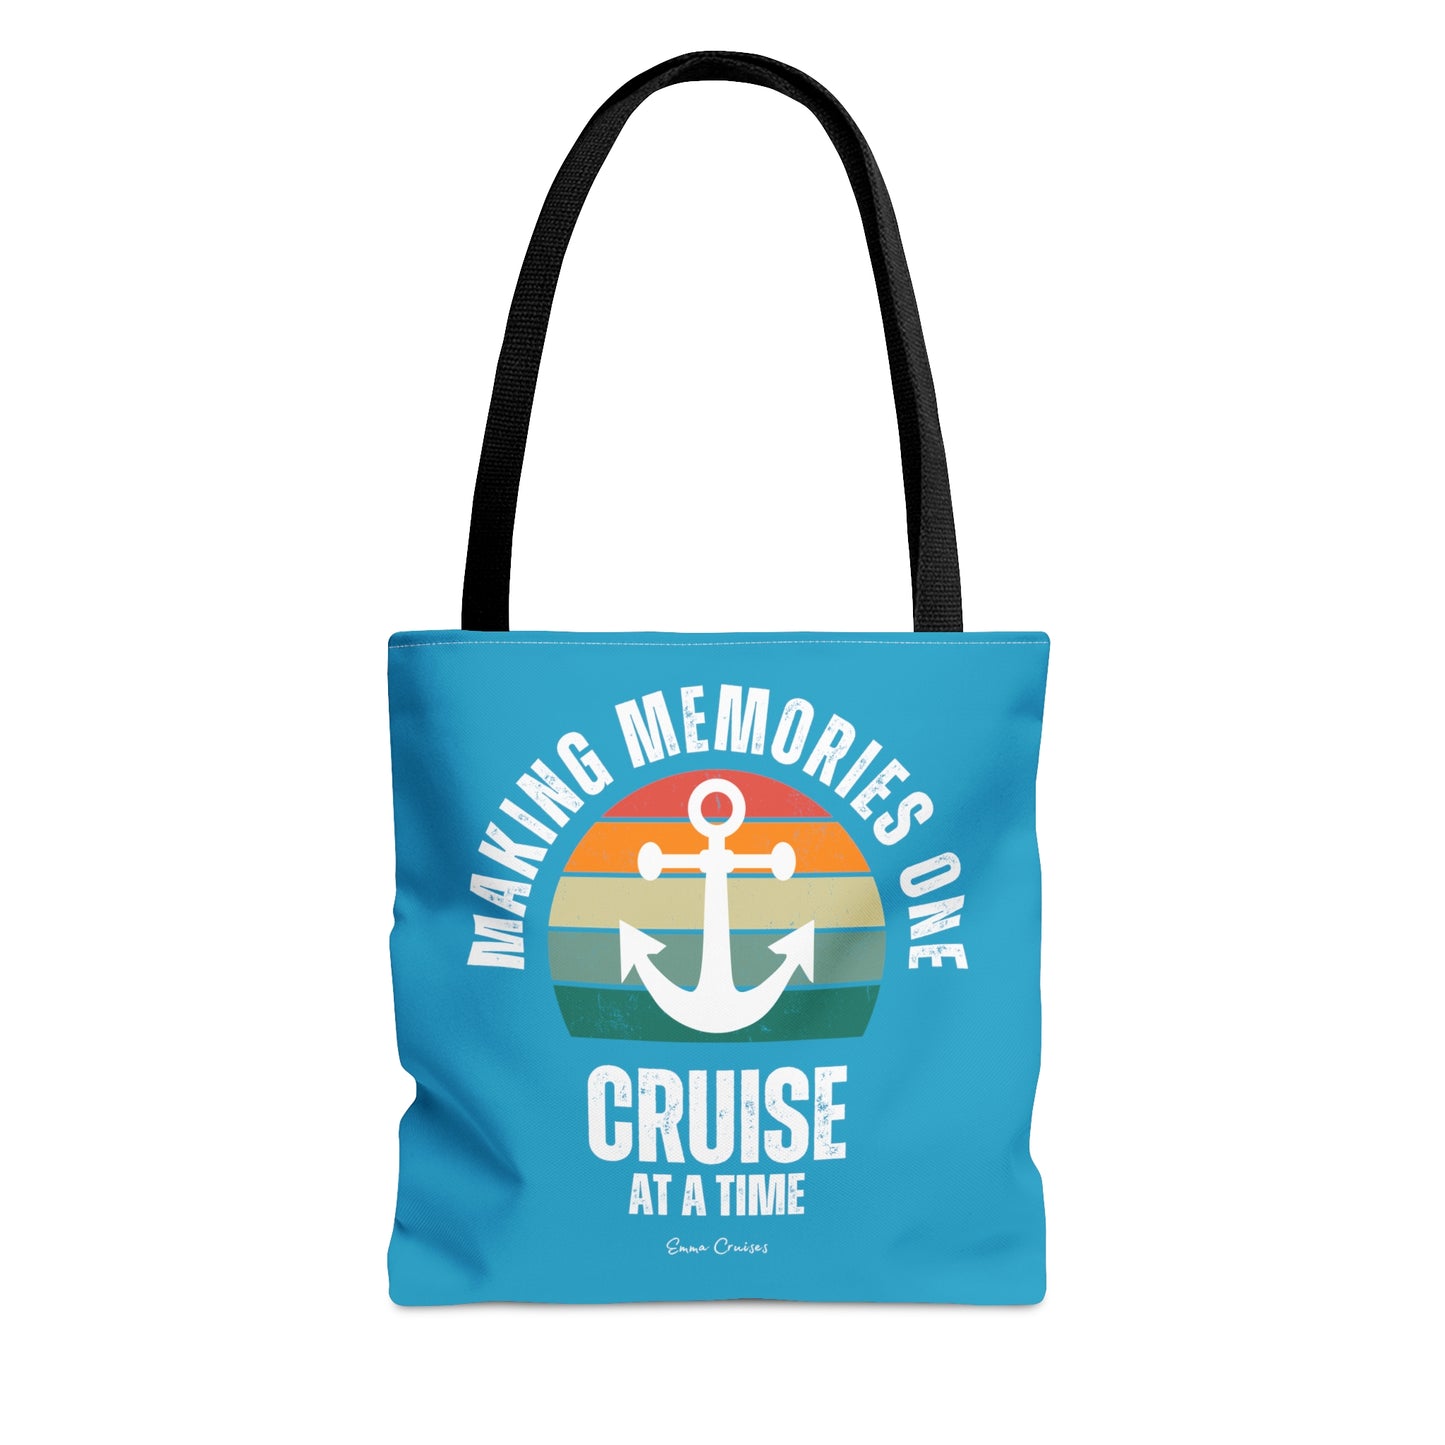 Making Memories One Cruise at a Time - Bag